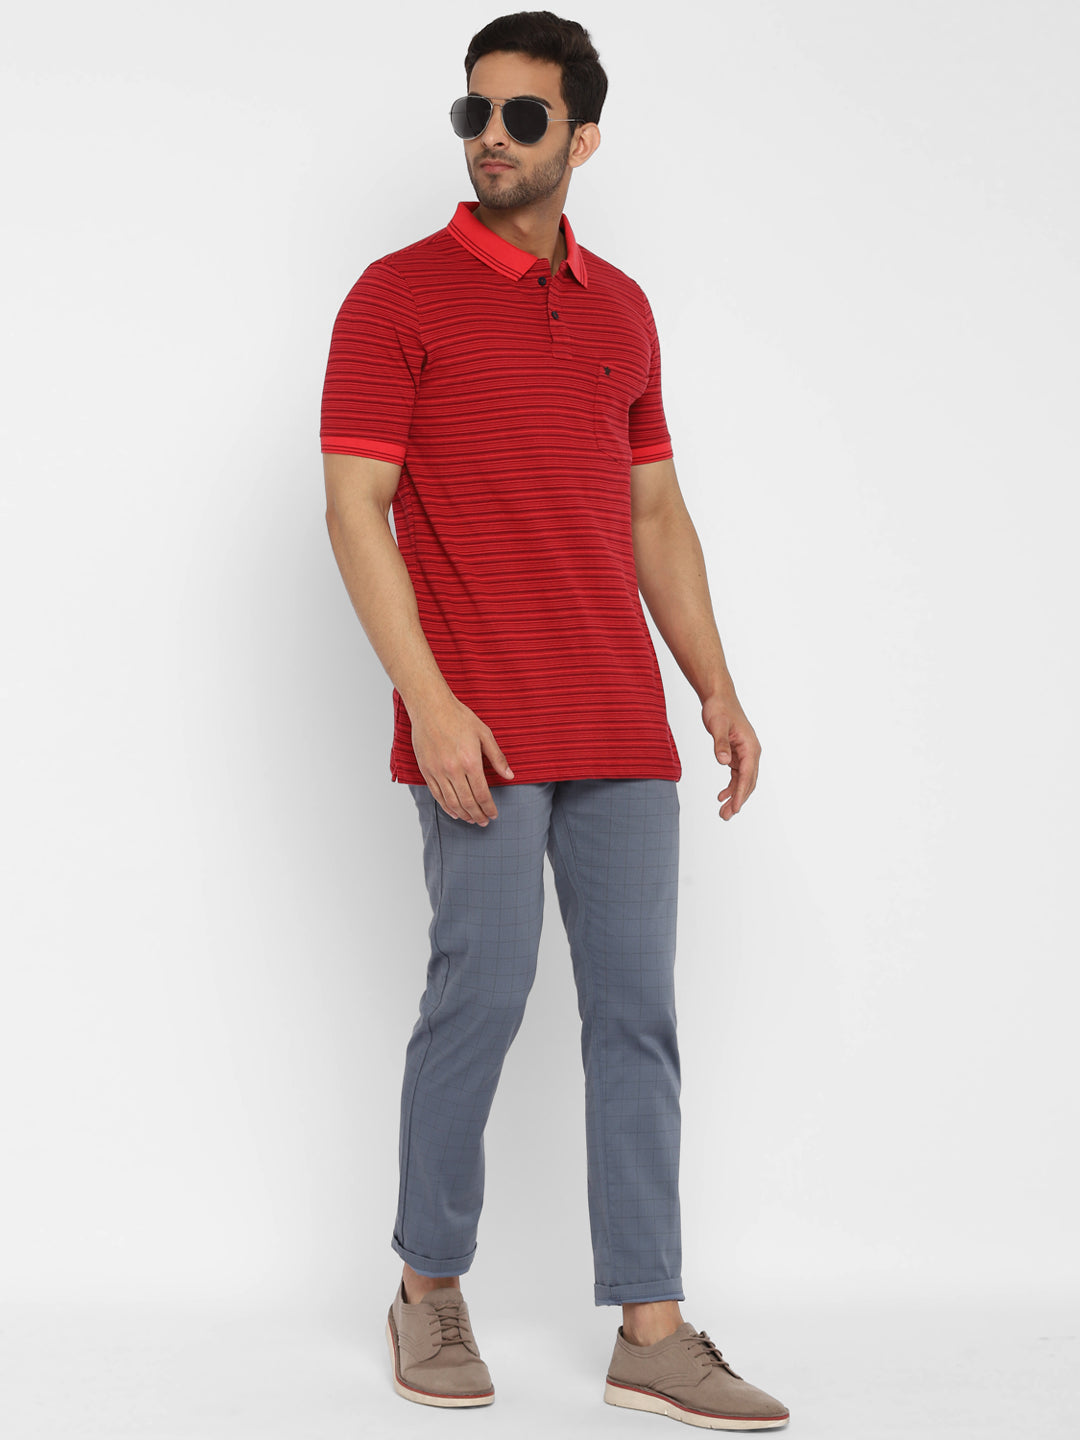 Red Striped Polo Neck T-Shirt